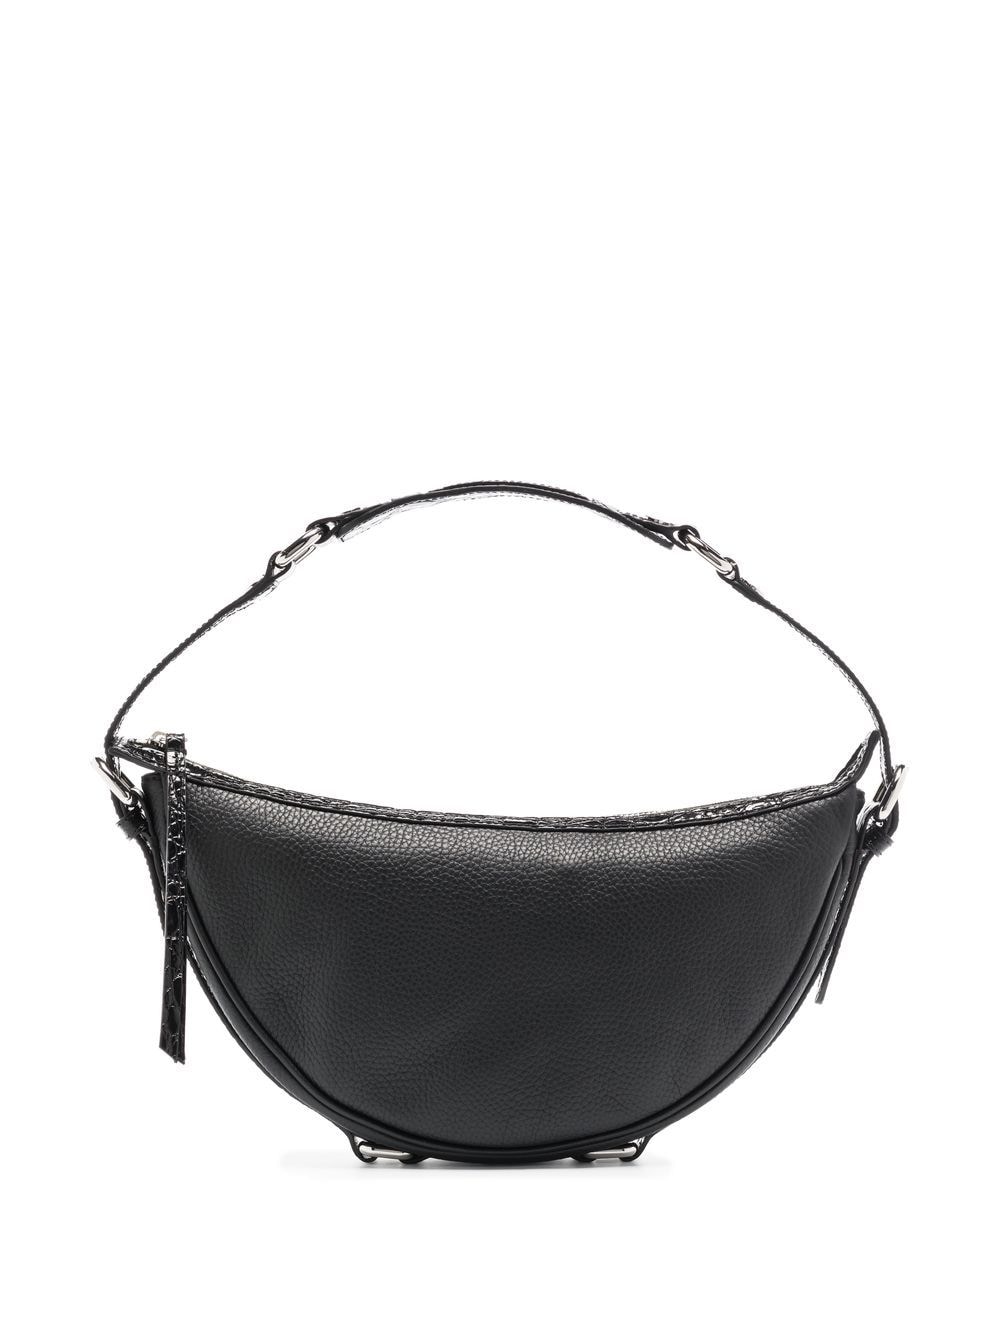 BY FAR grained-leather curved shoulder bag - Black von BY FAR